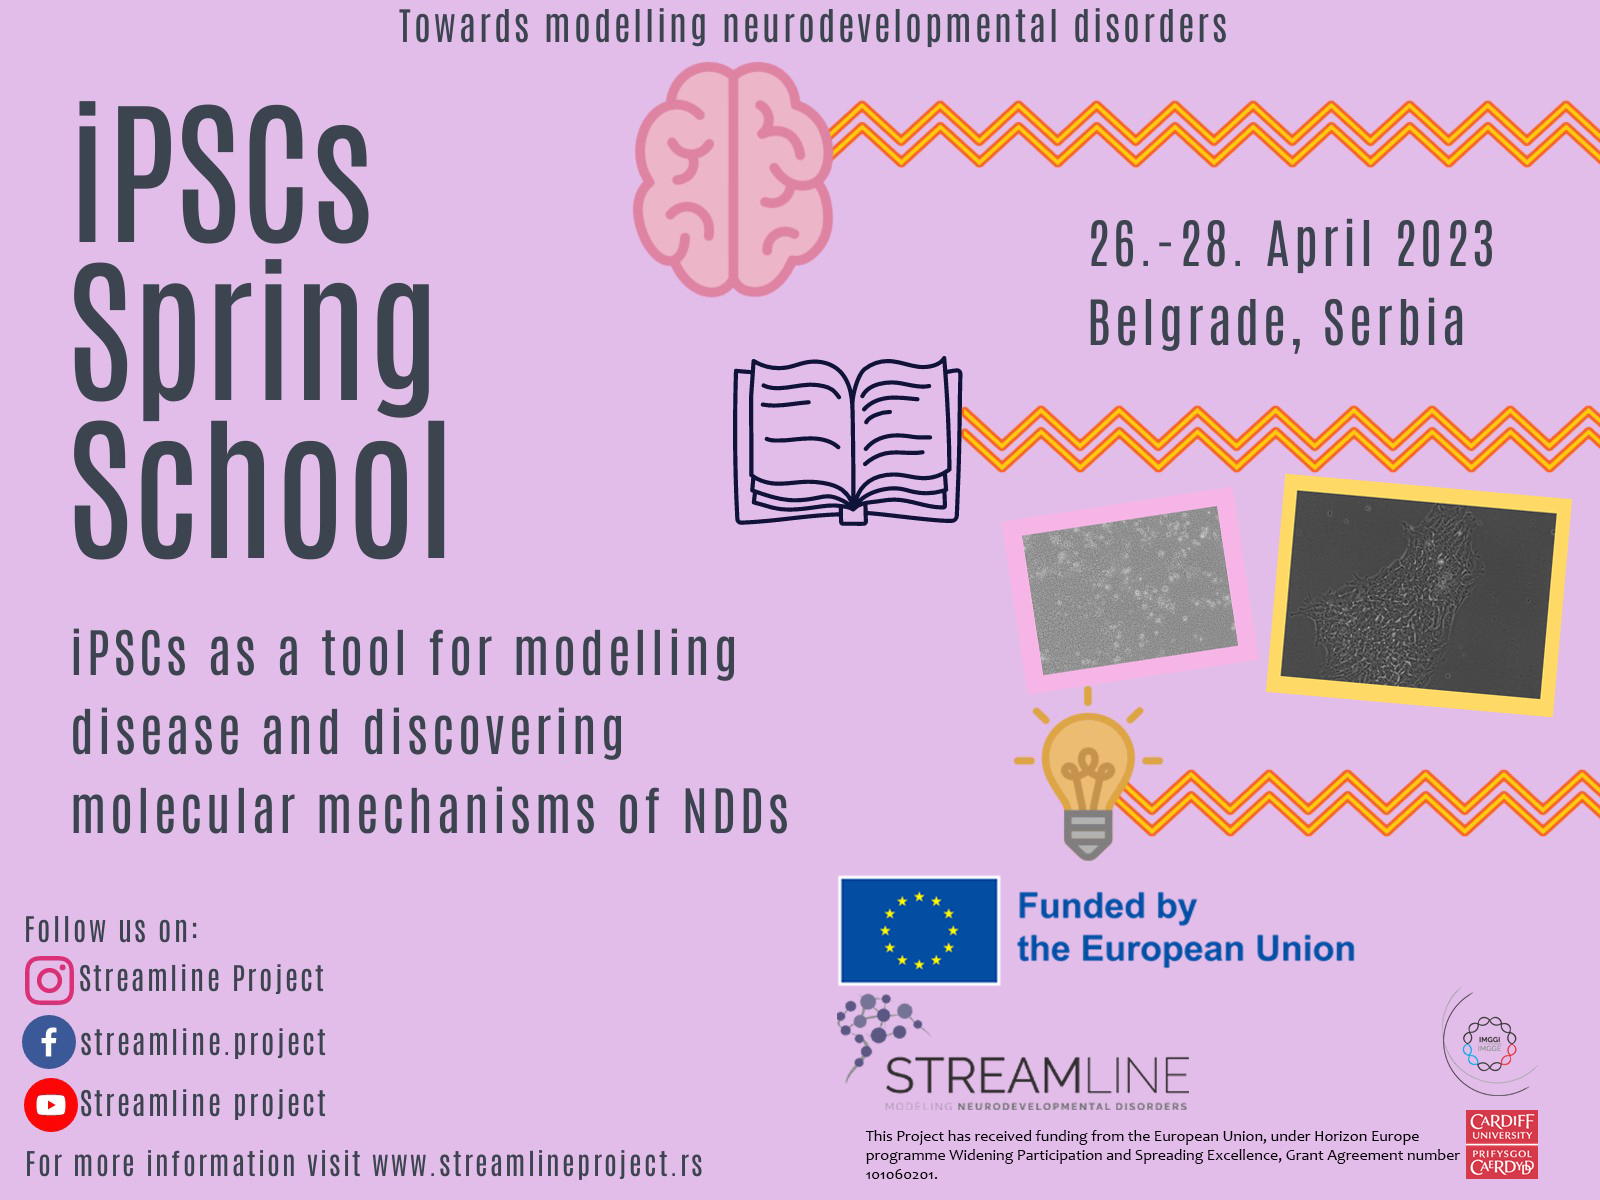 Streamline iPSCs Spring School “iPSCs as a tool for modelling disease and discovering molecular mechanisms of NDDs”